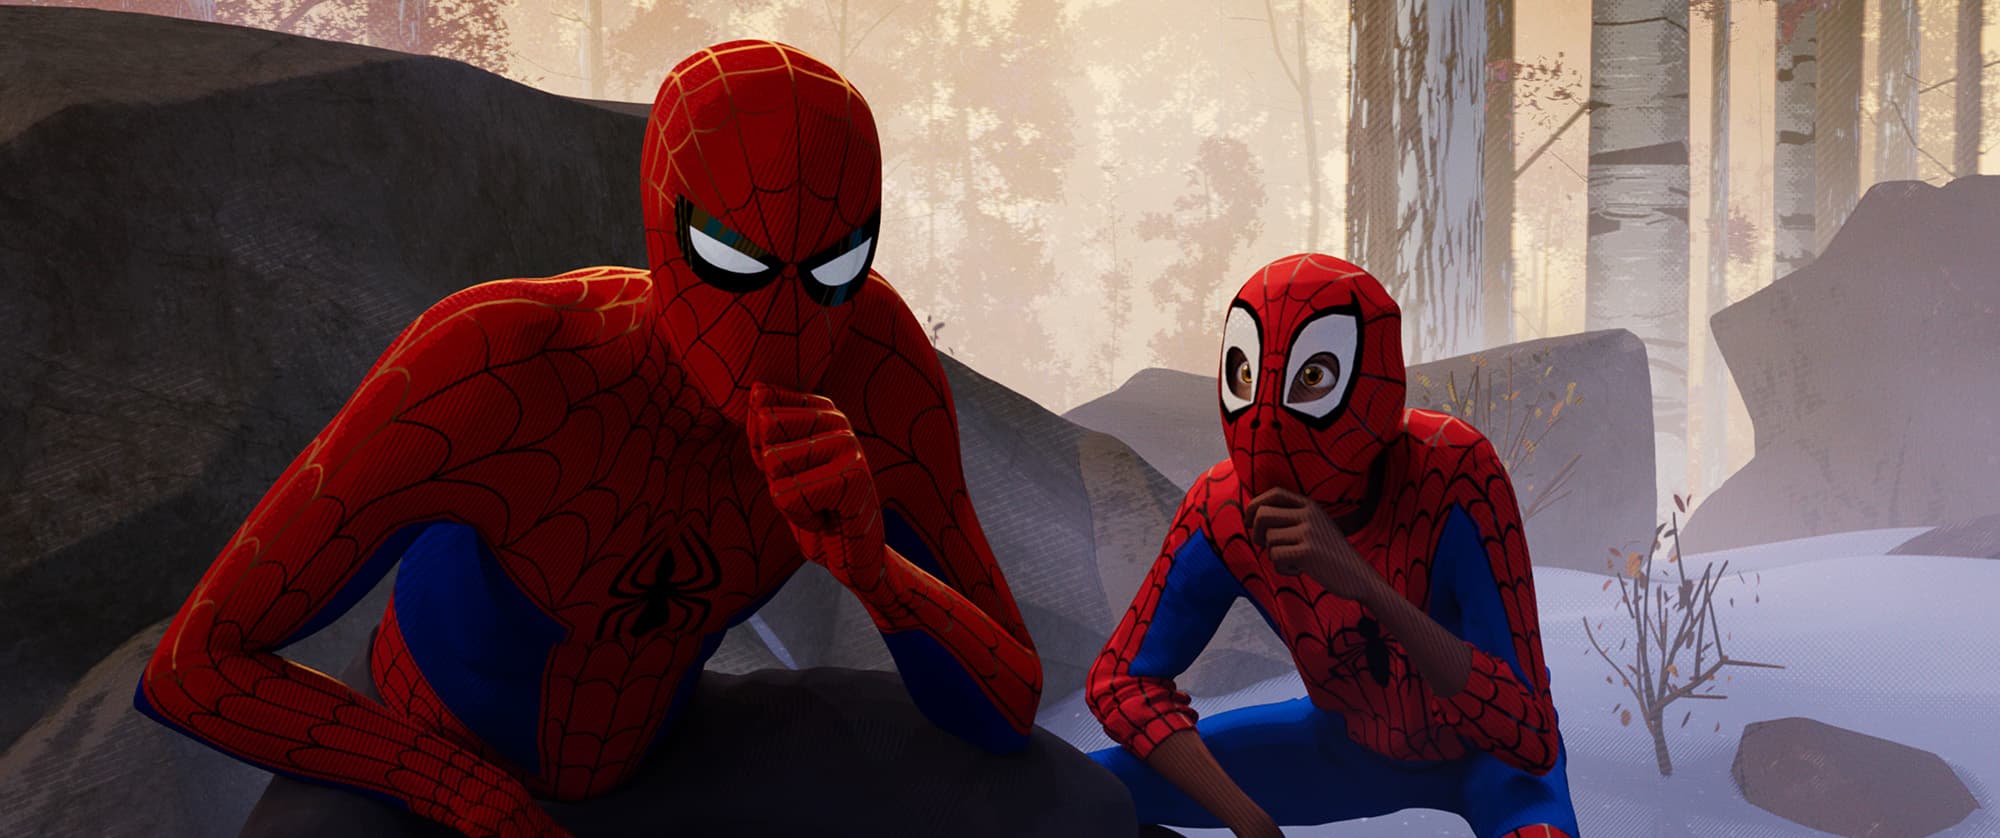 Peter Parker and Miles Morales in Spider-Man: Into the Spider-Verse